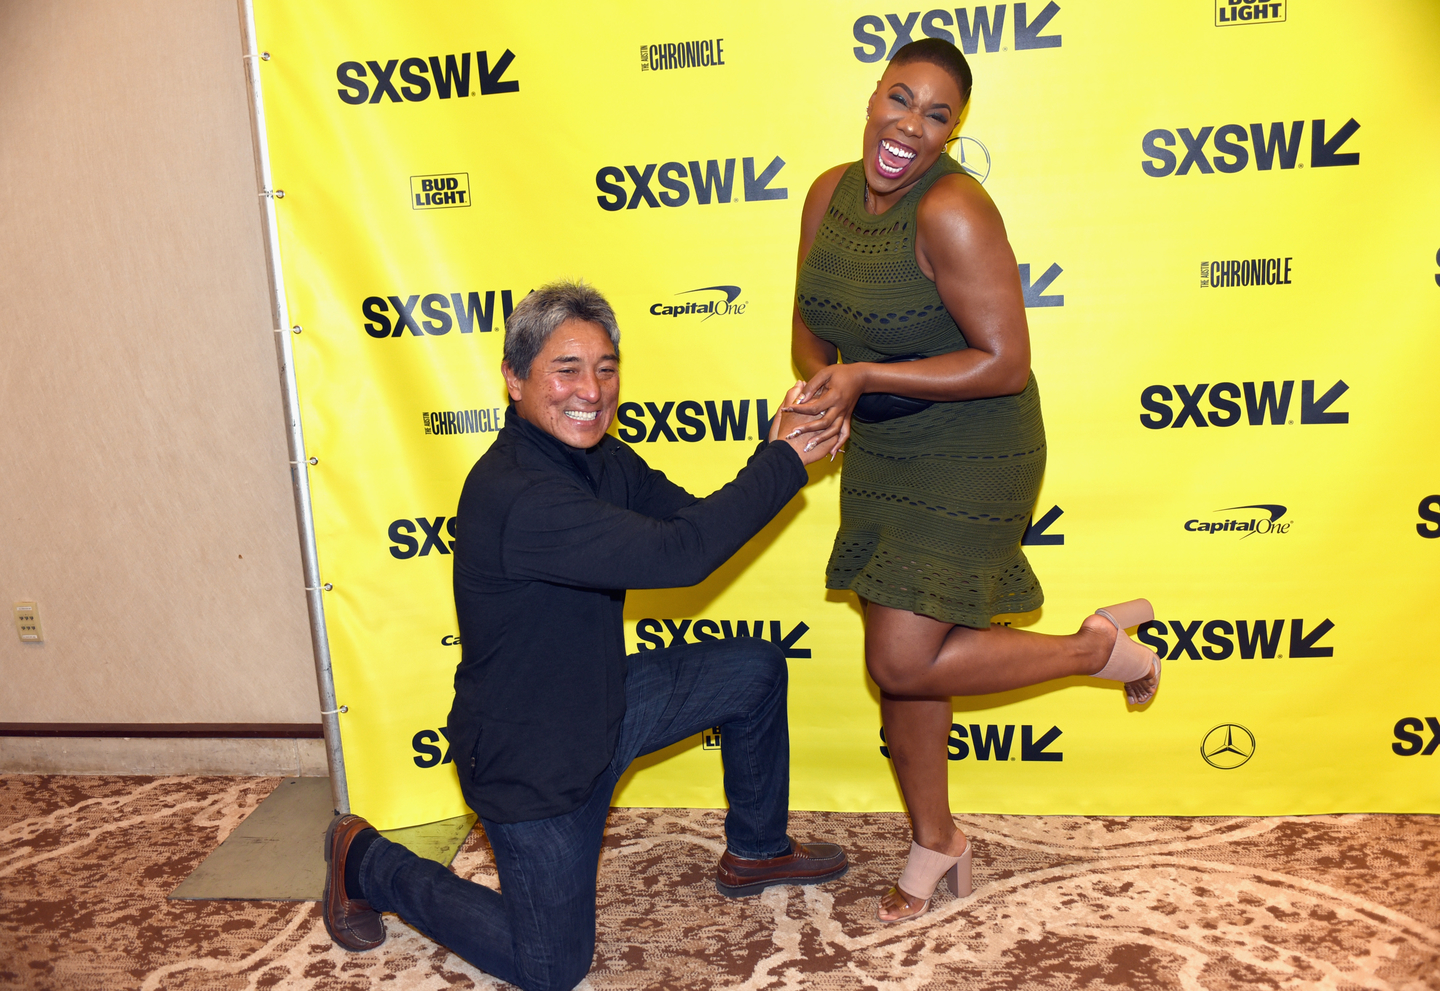 Guy Kawasaki and Symone Sanders were together for the “Technology, Media, and Politics” talk in the Government track. Photo by JEALEX Photo/Getty Images for SXSW